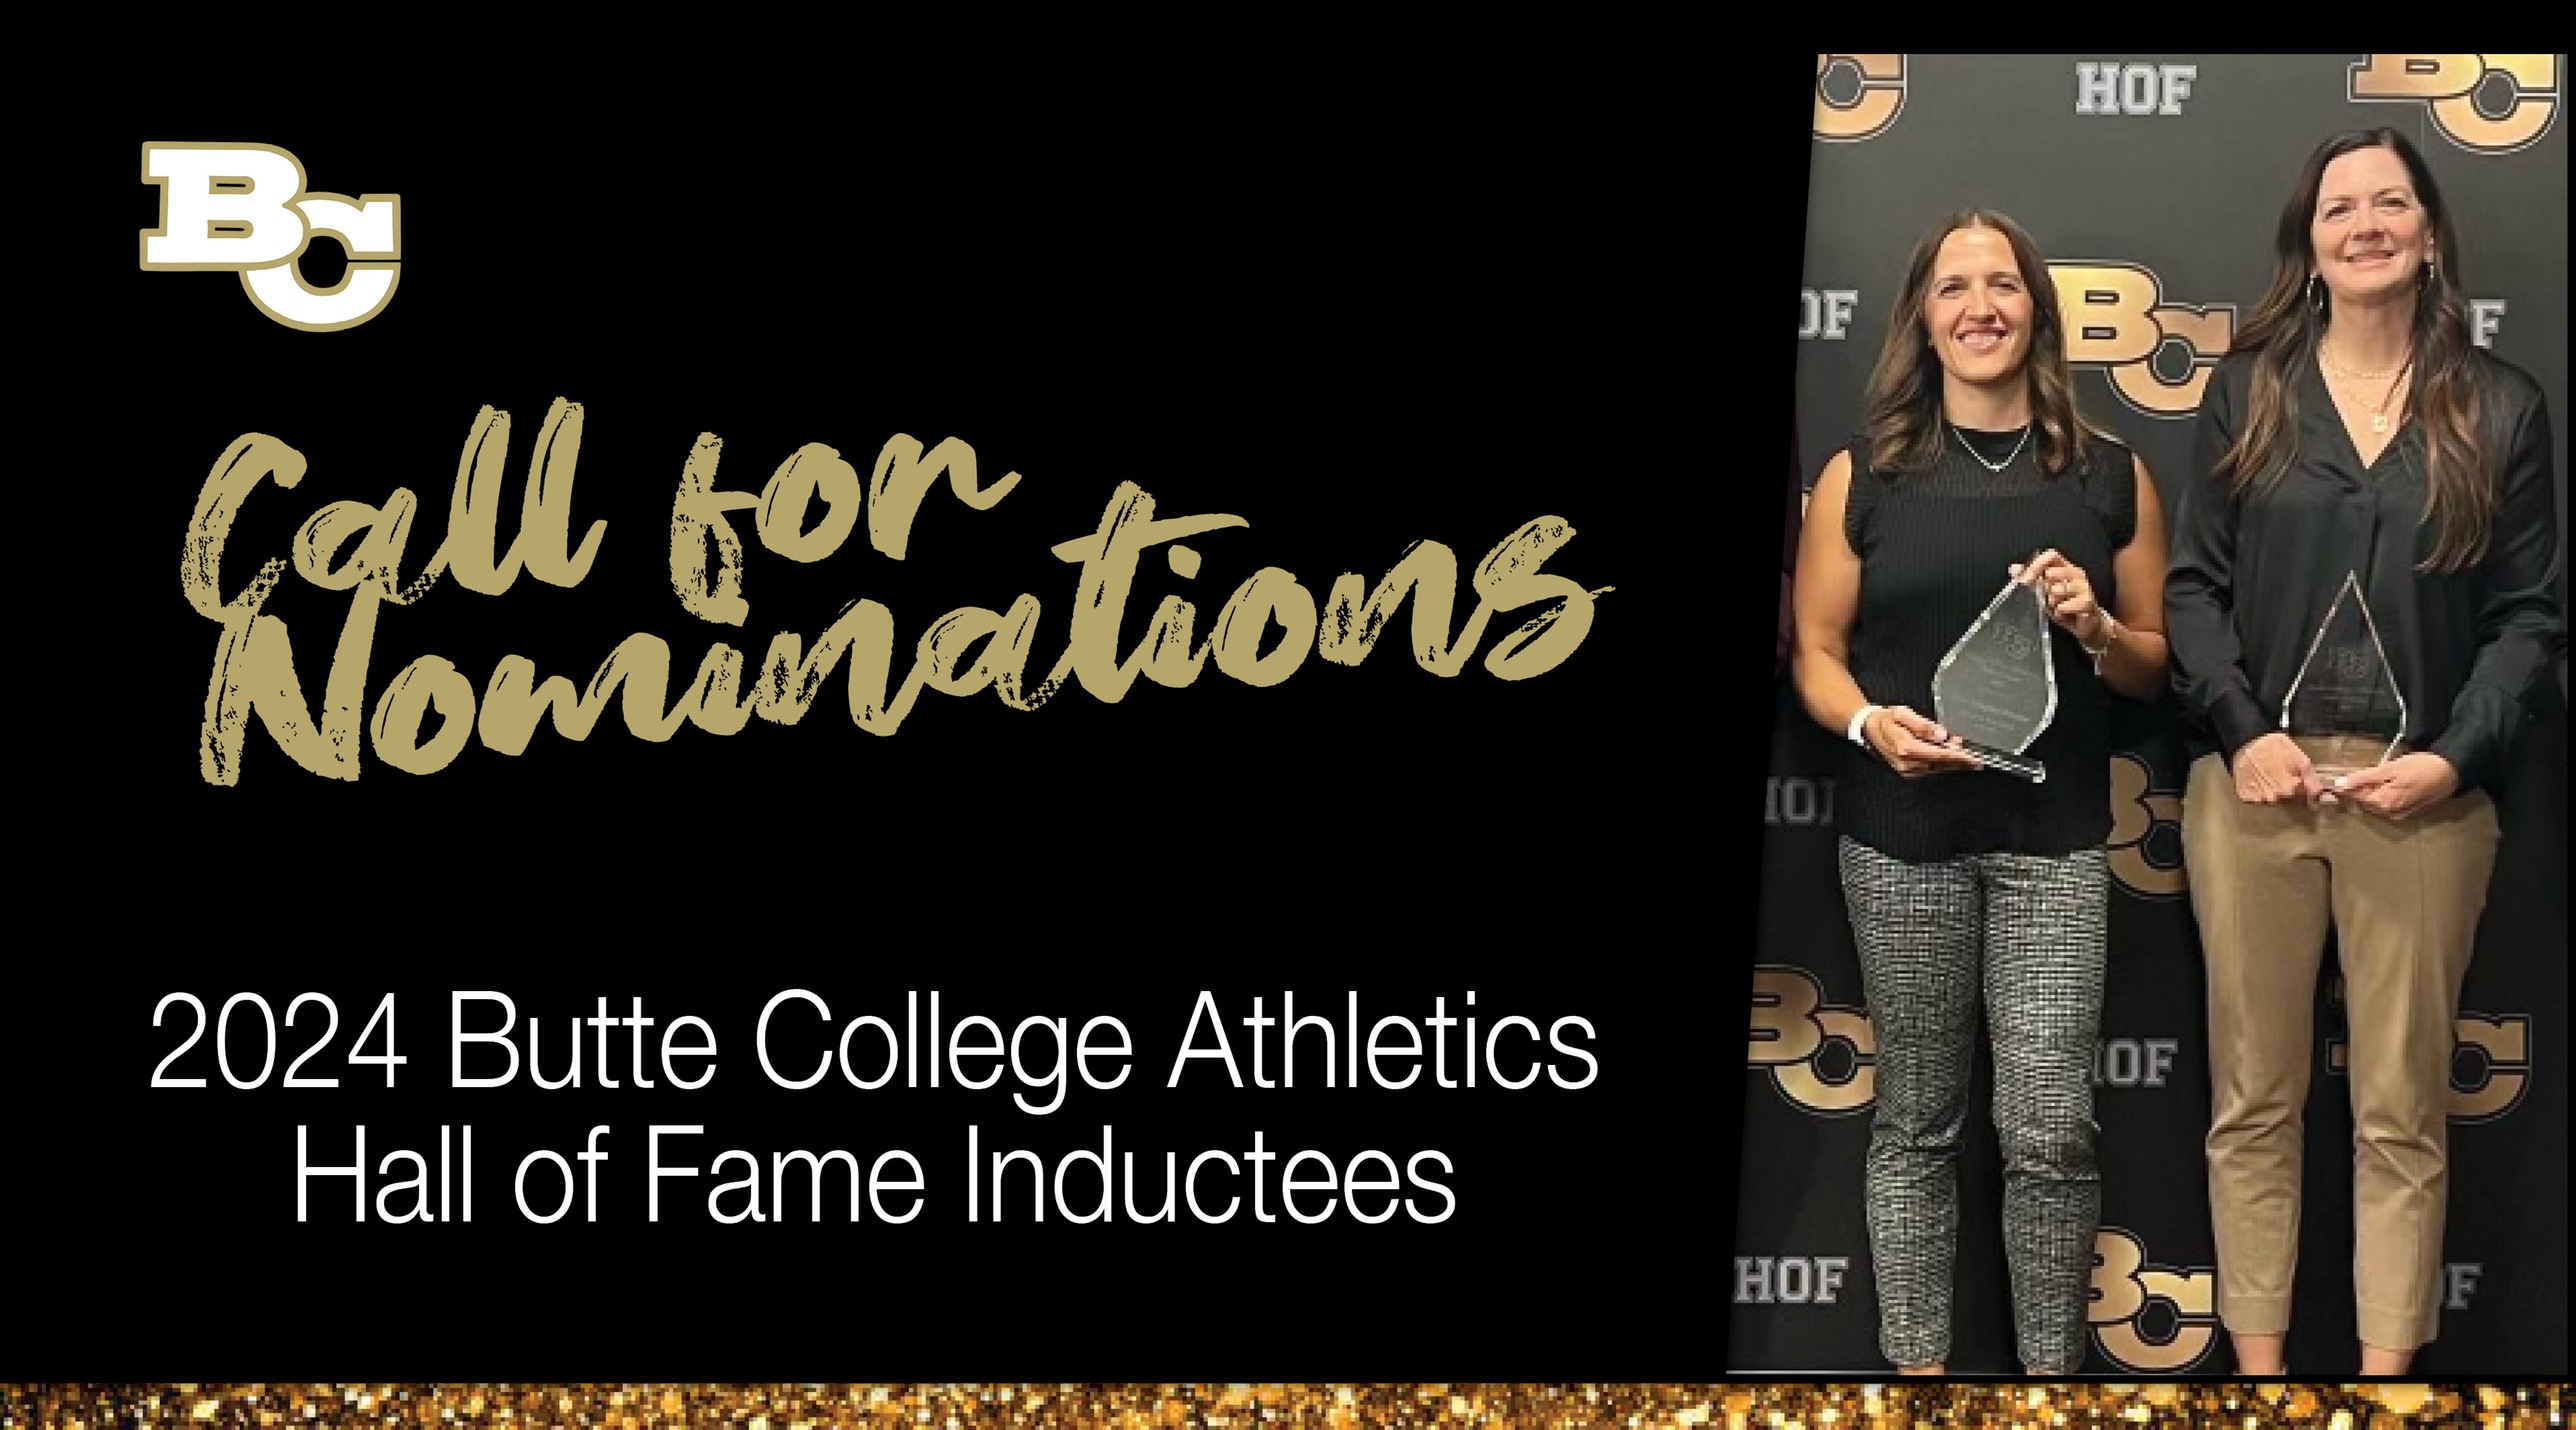 Call for Nominations for 2024 Butte College Athletics Hall of Fame Class